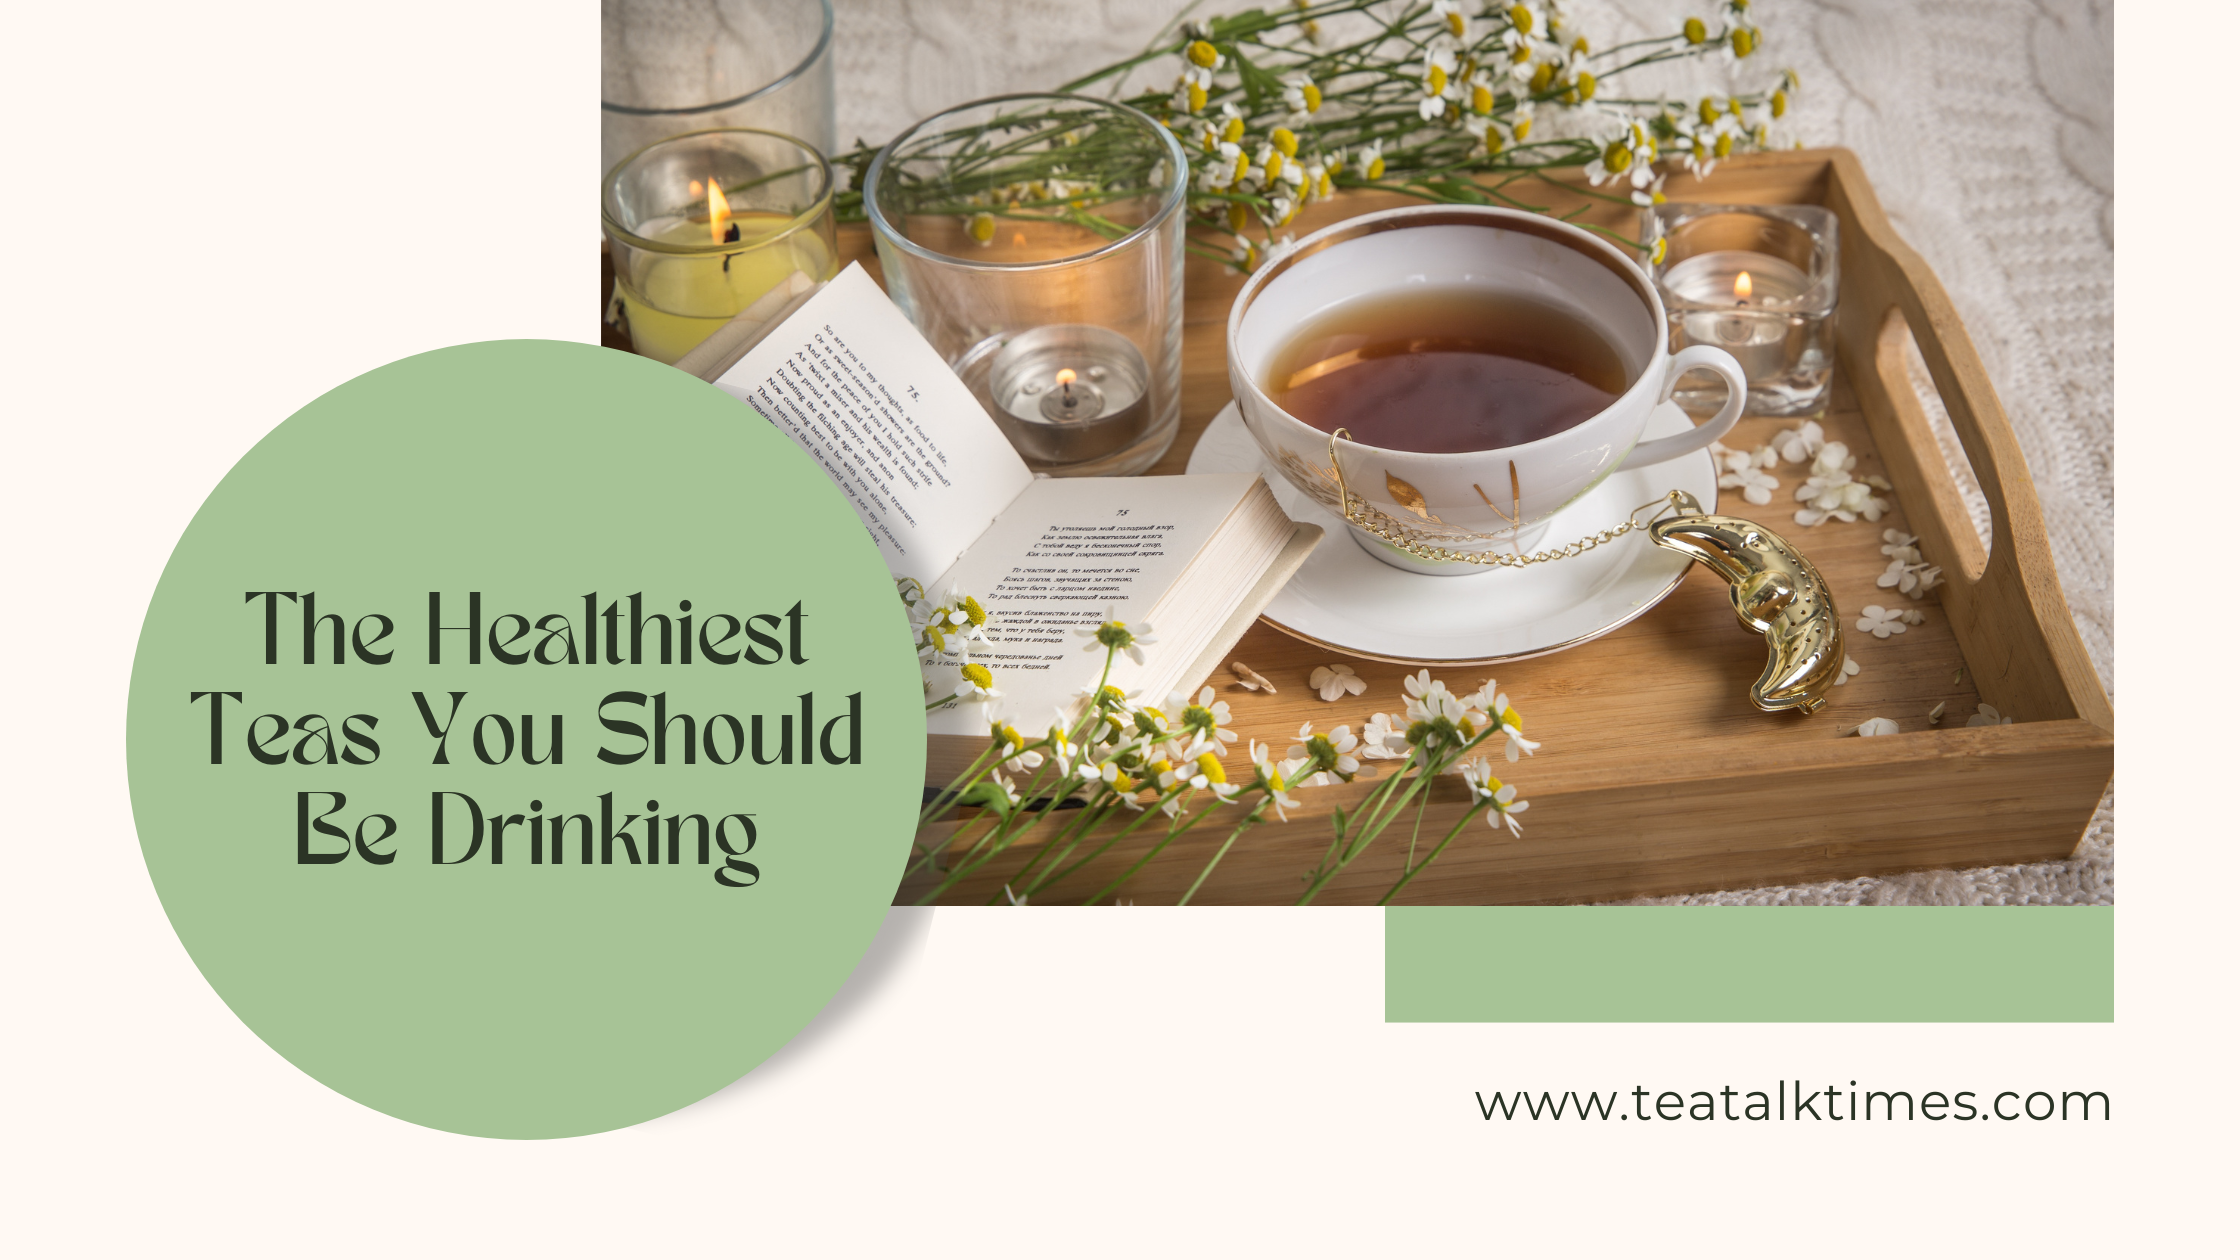 The Healthiest Teas You Should Be Drinking